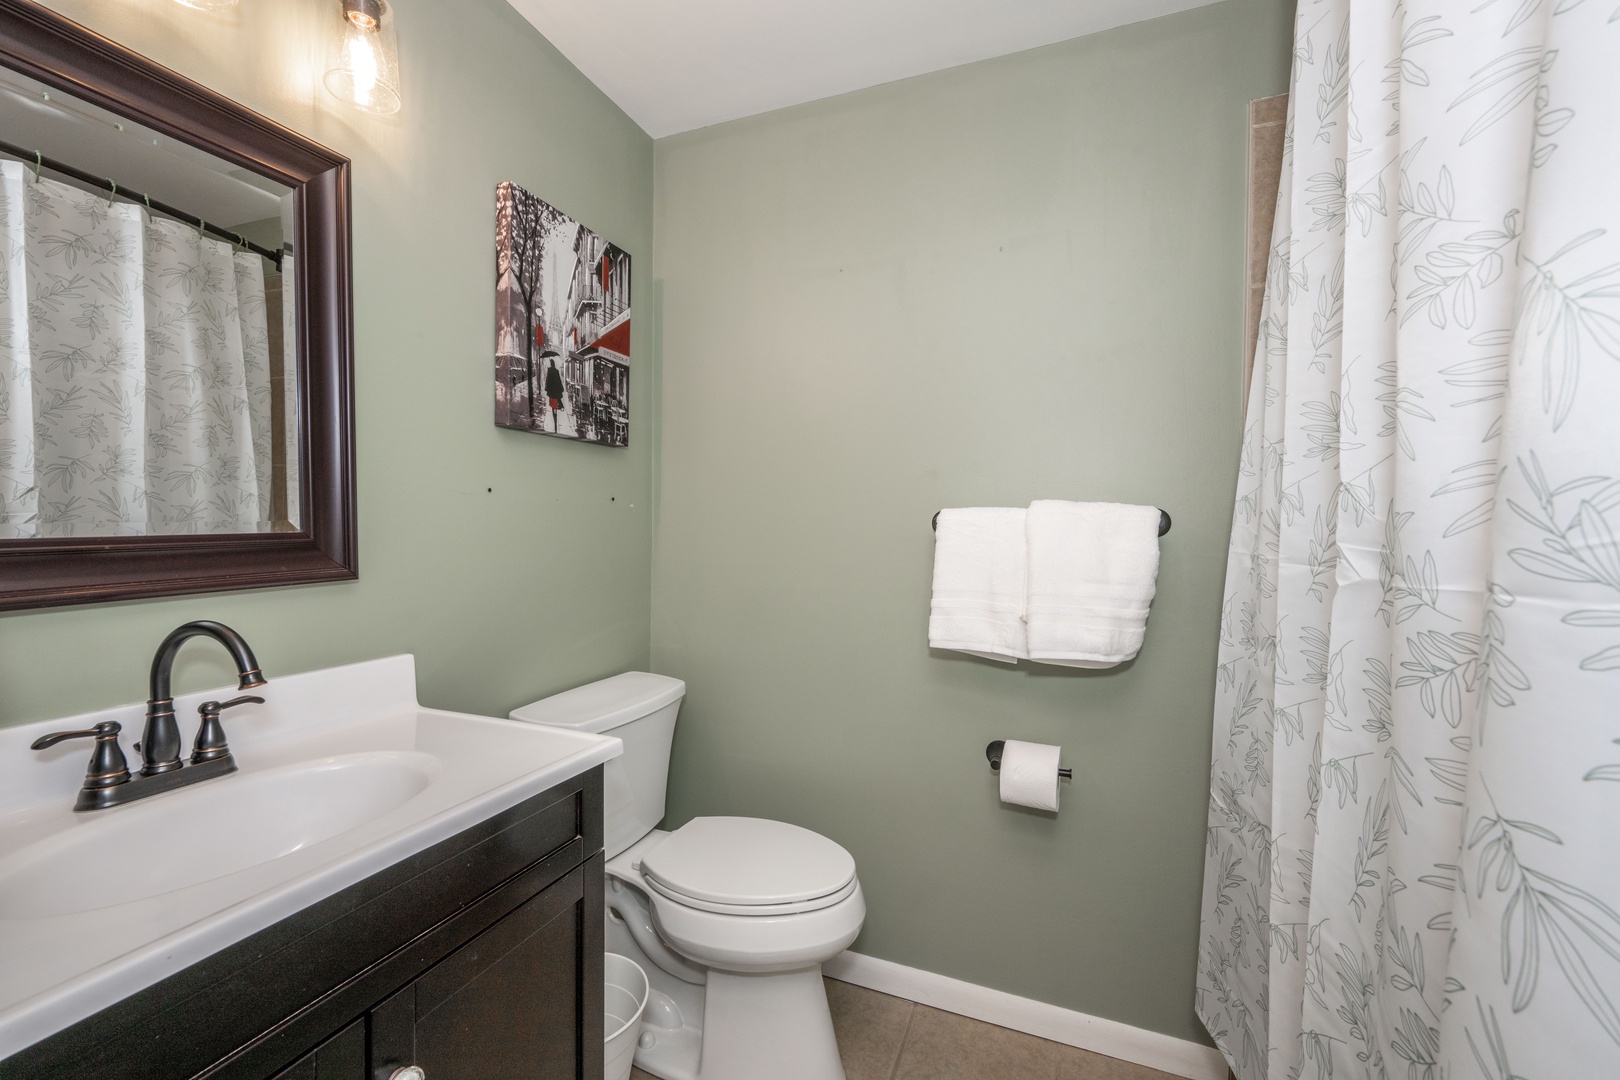 The full shared bathroom offers a single vanity & shower/tub combo